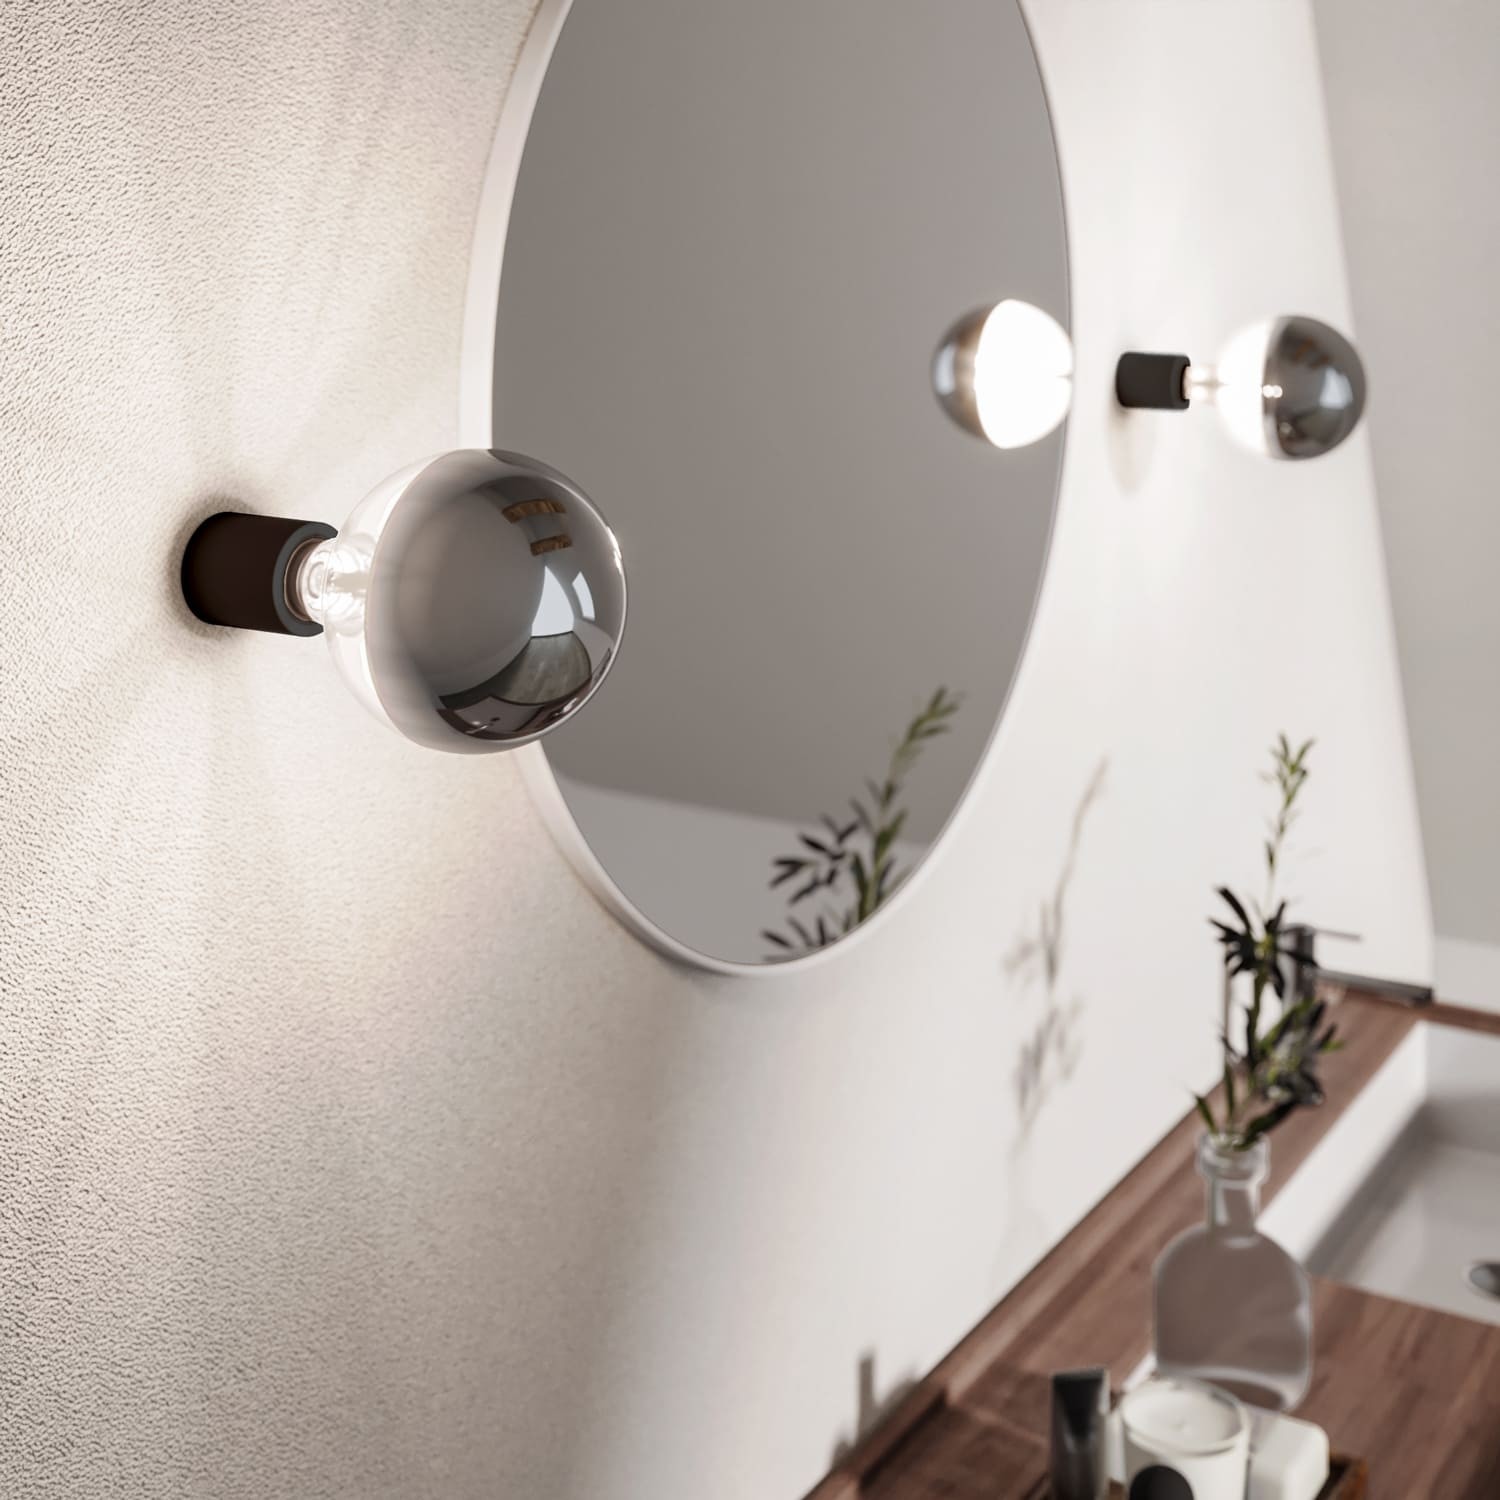 Applique with exposed light bulb and half silver sphere - IP44 Waterproof